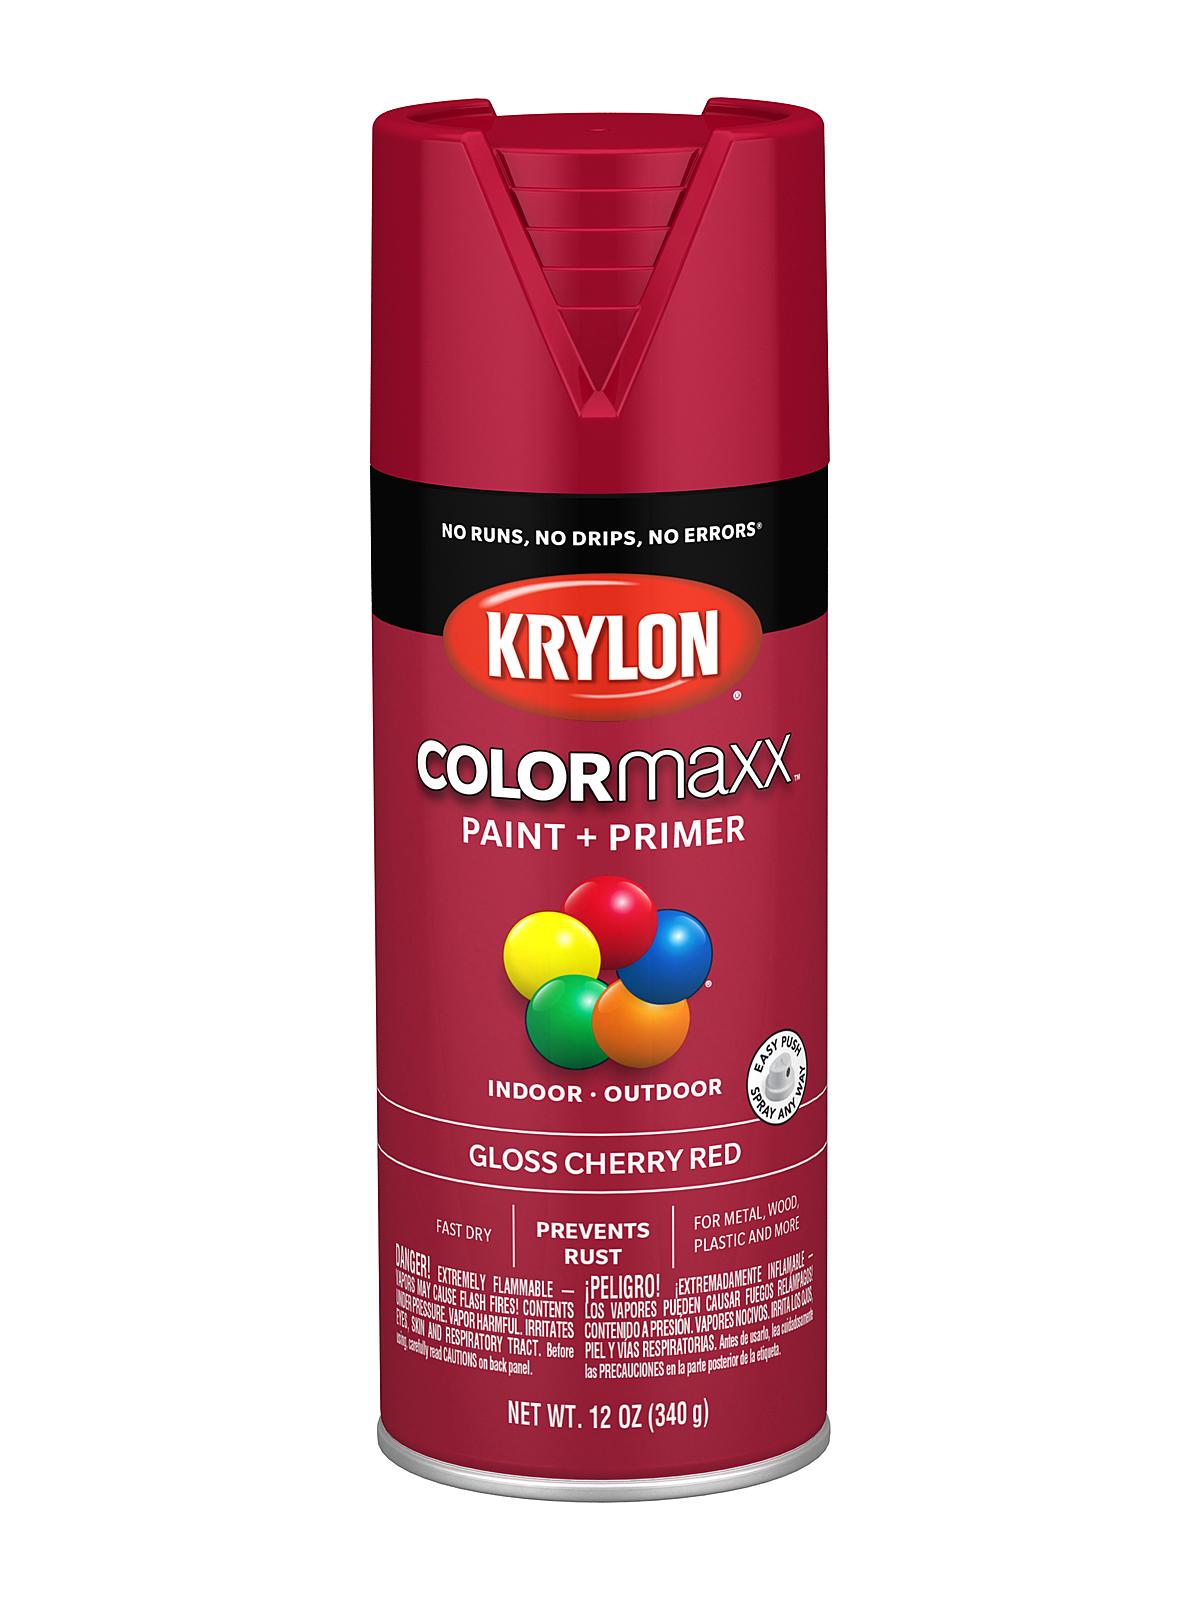 COLORmaxxx Cherry Red Gloss